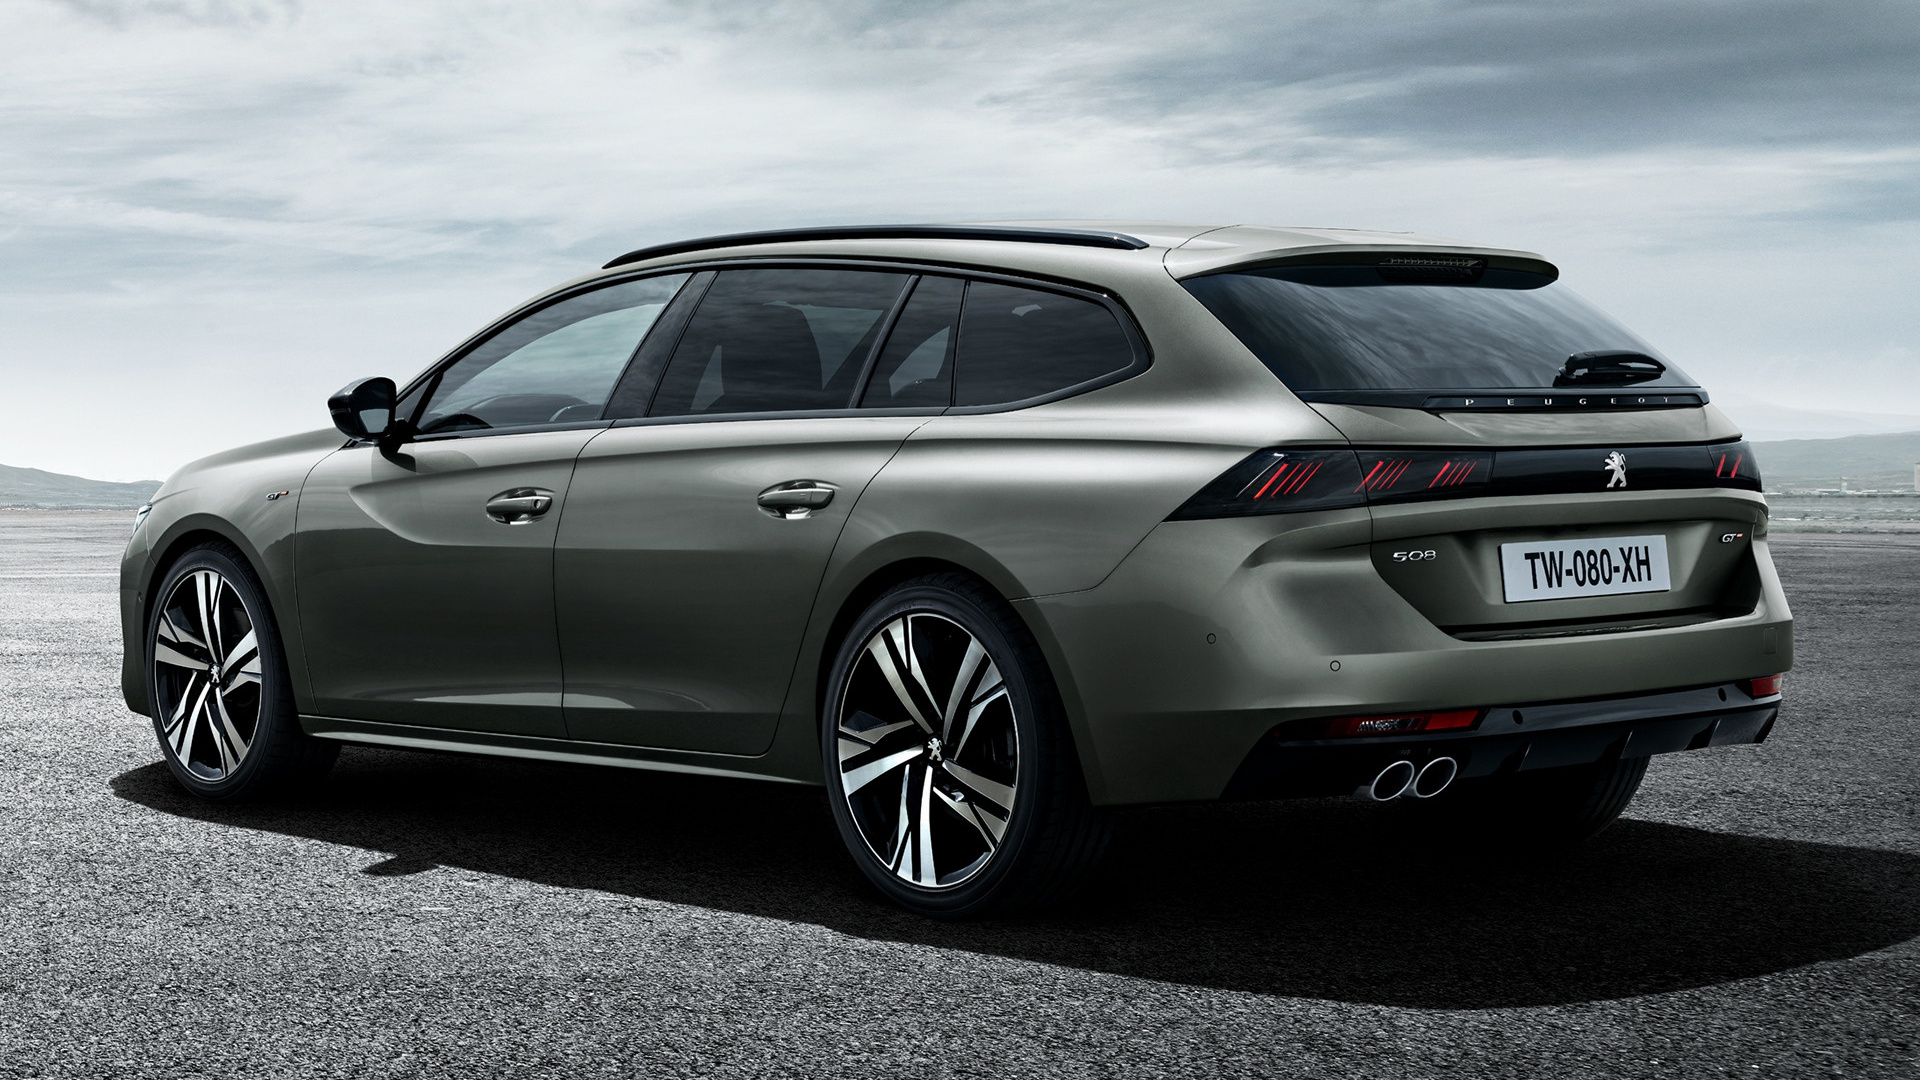 2018 Peugeot 508 Sw Gt Wallpapers And Hd Images Car Pixel